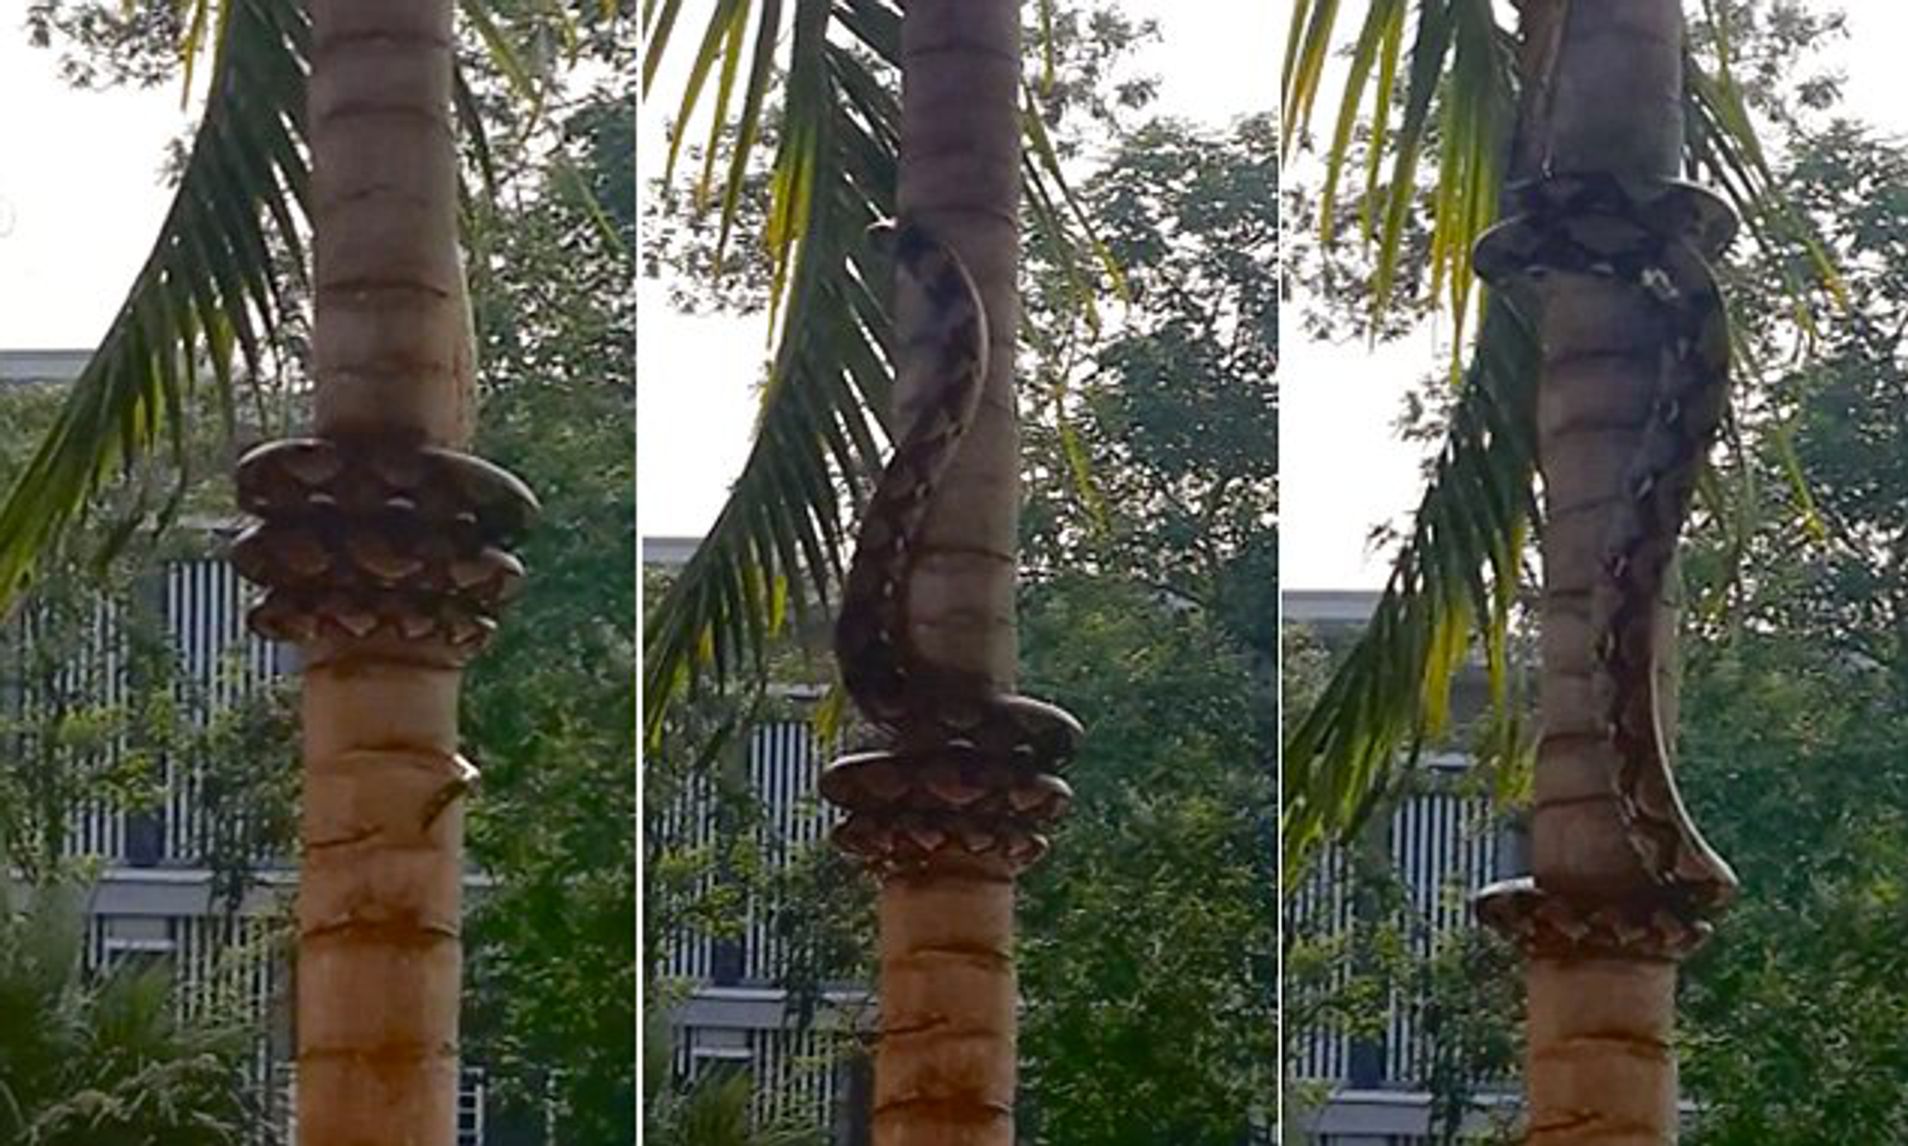 Three pictures showing a python tied around a tree trunk, then with its head reaching upwards and then with half its wrapped around the trunk higher up.